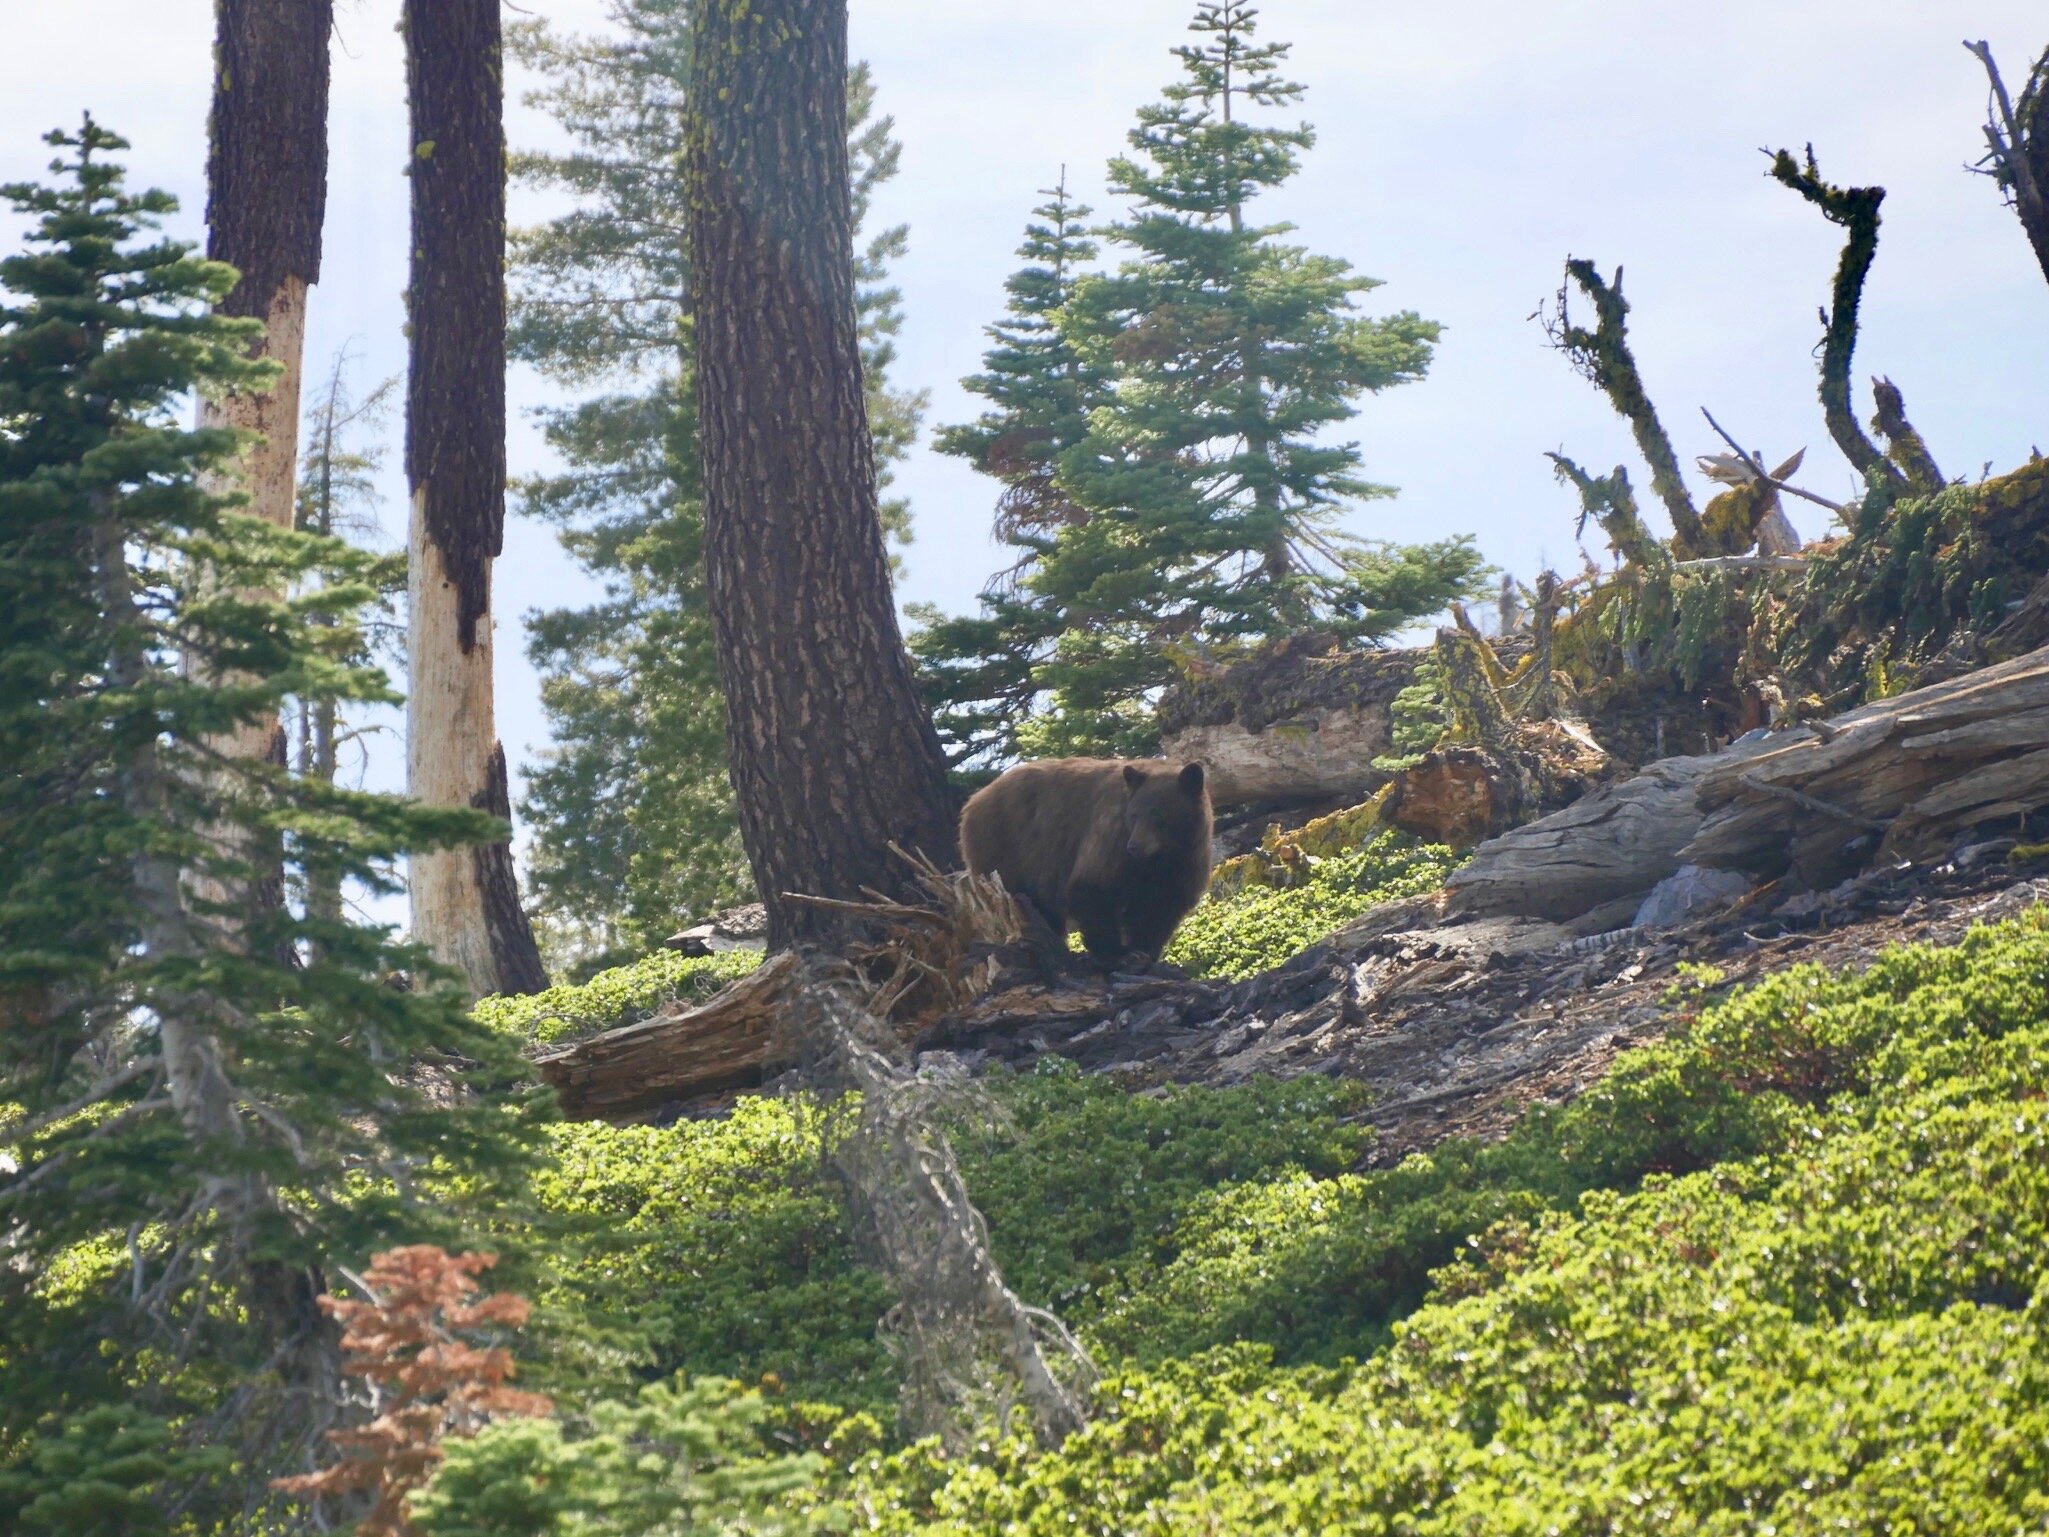 Photo 1 - first spotting our bear in Lassen Volcanic National Park.  Photo by Jude Boudreaux, 6/5/21